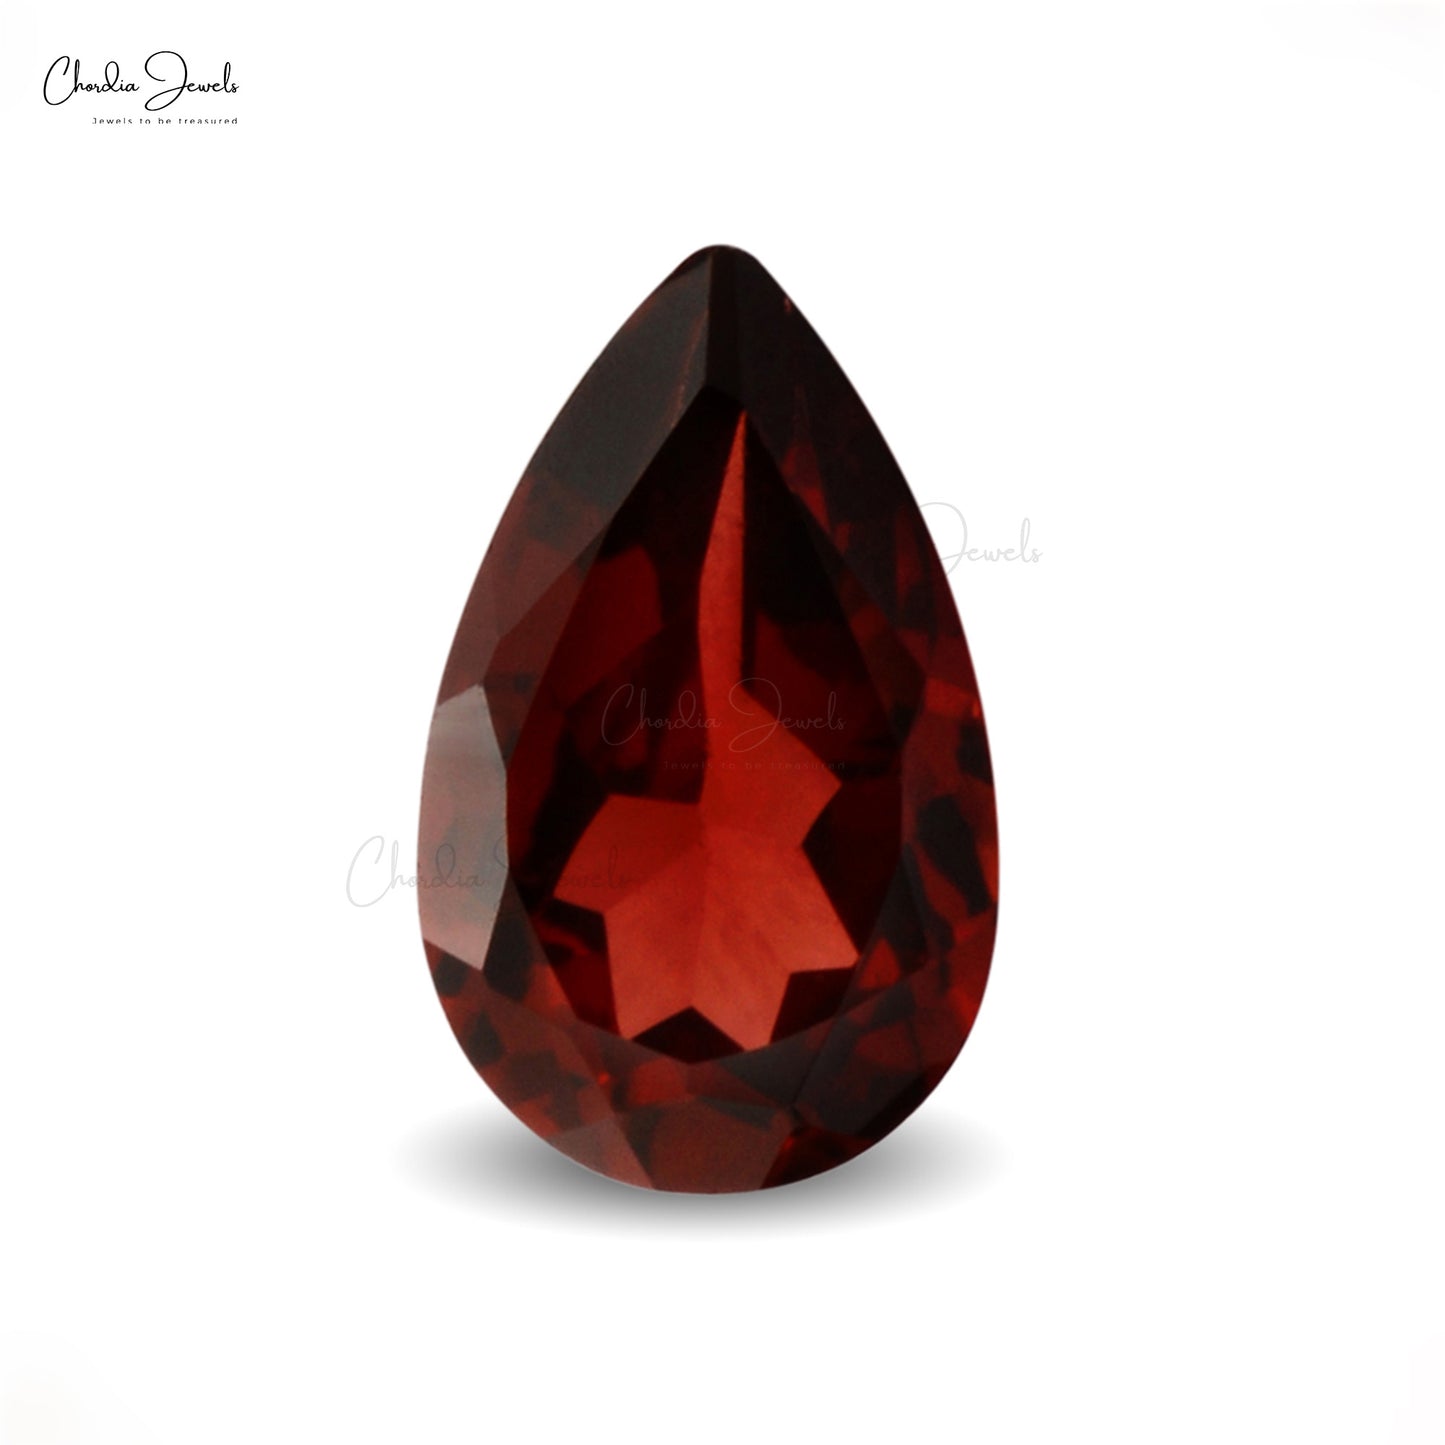 Mozambique Garnet 5x3 MM Pear Cut Faceted Loose Gemstone for Jewelry, 1 Piece